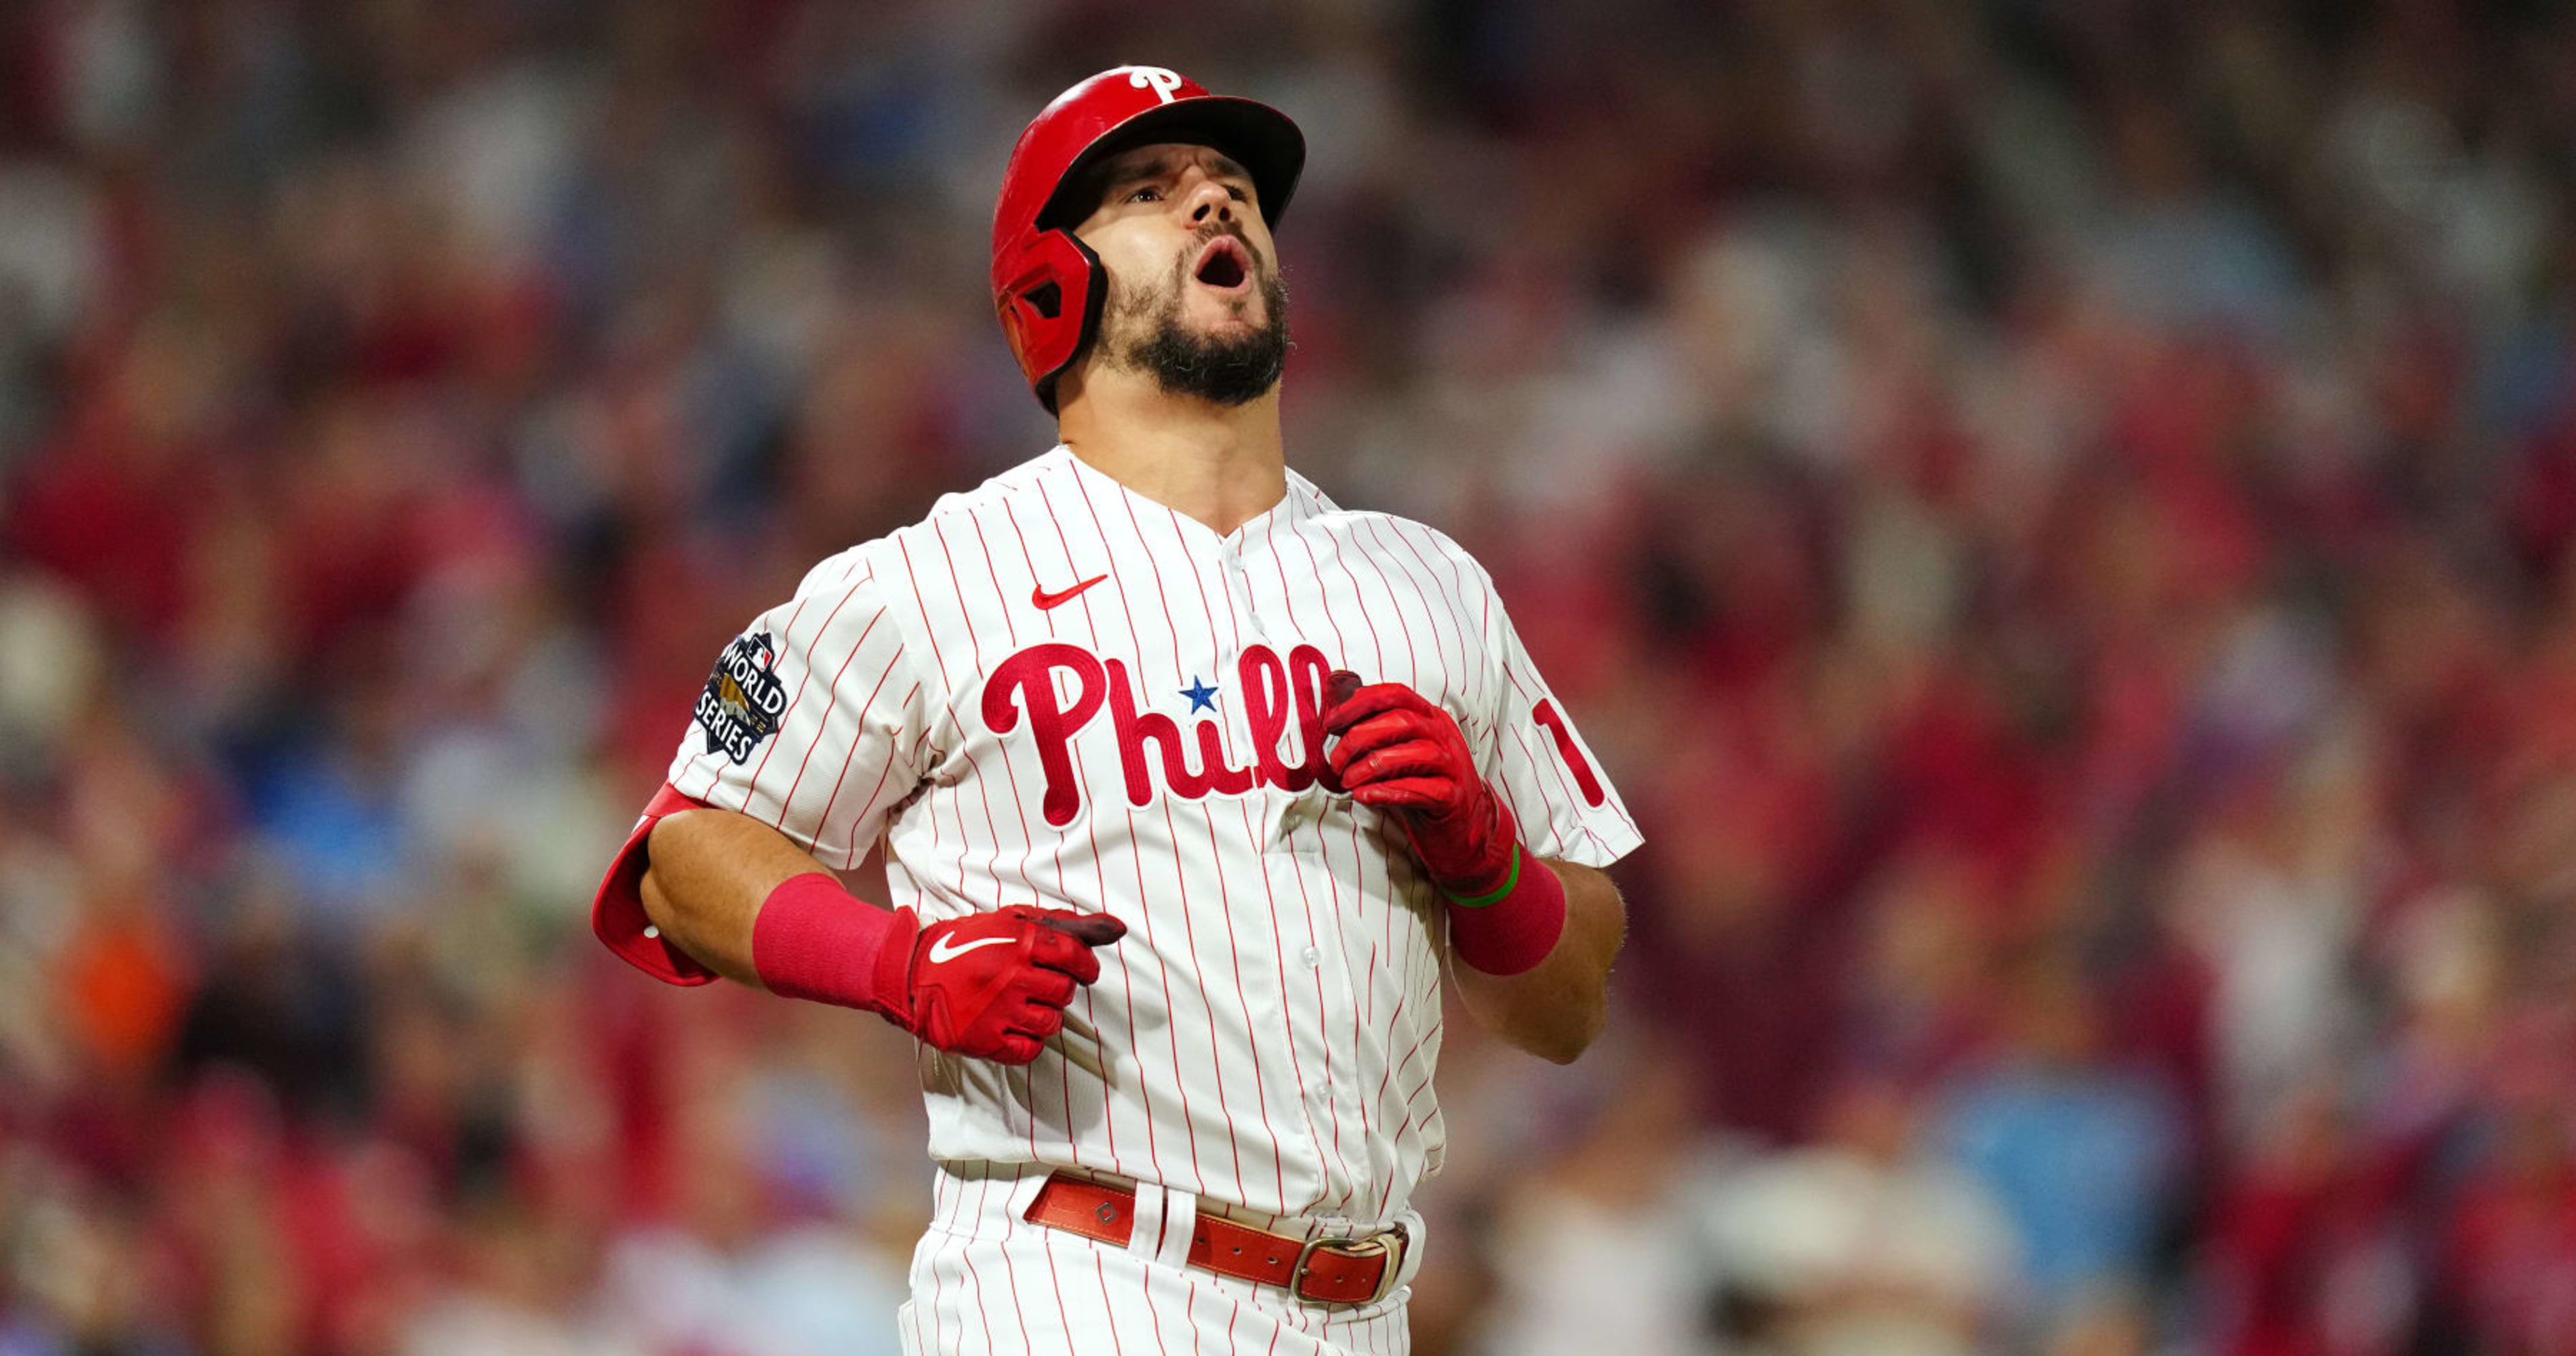 Phillies' Kyle Schwarber 'I Really Don't Give a St' About Being No